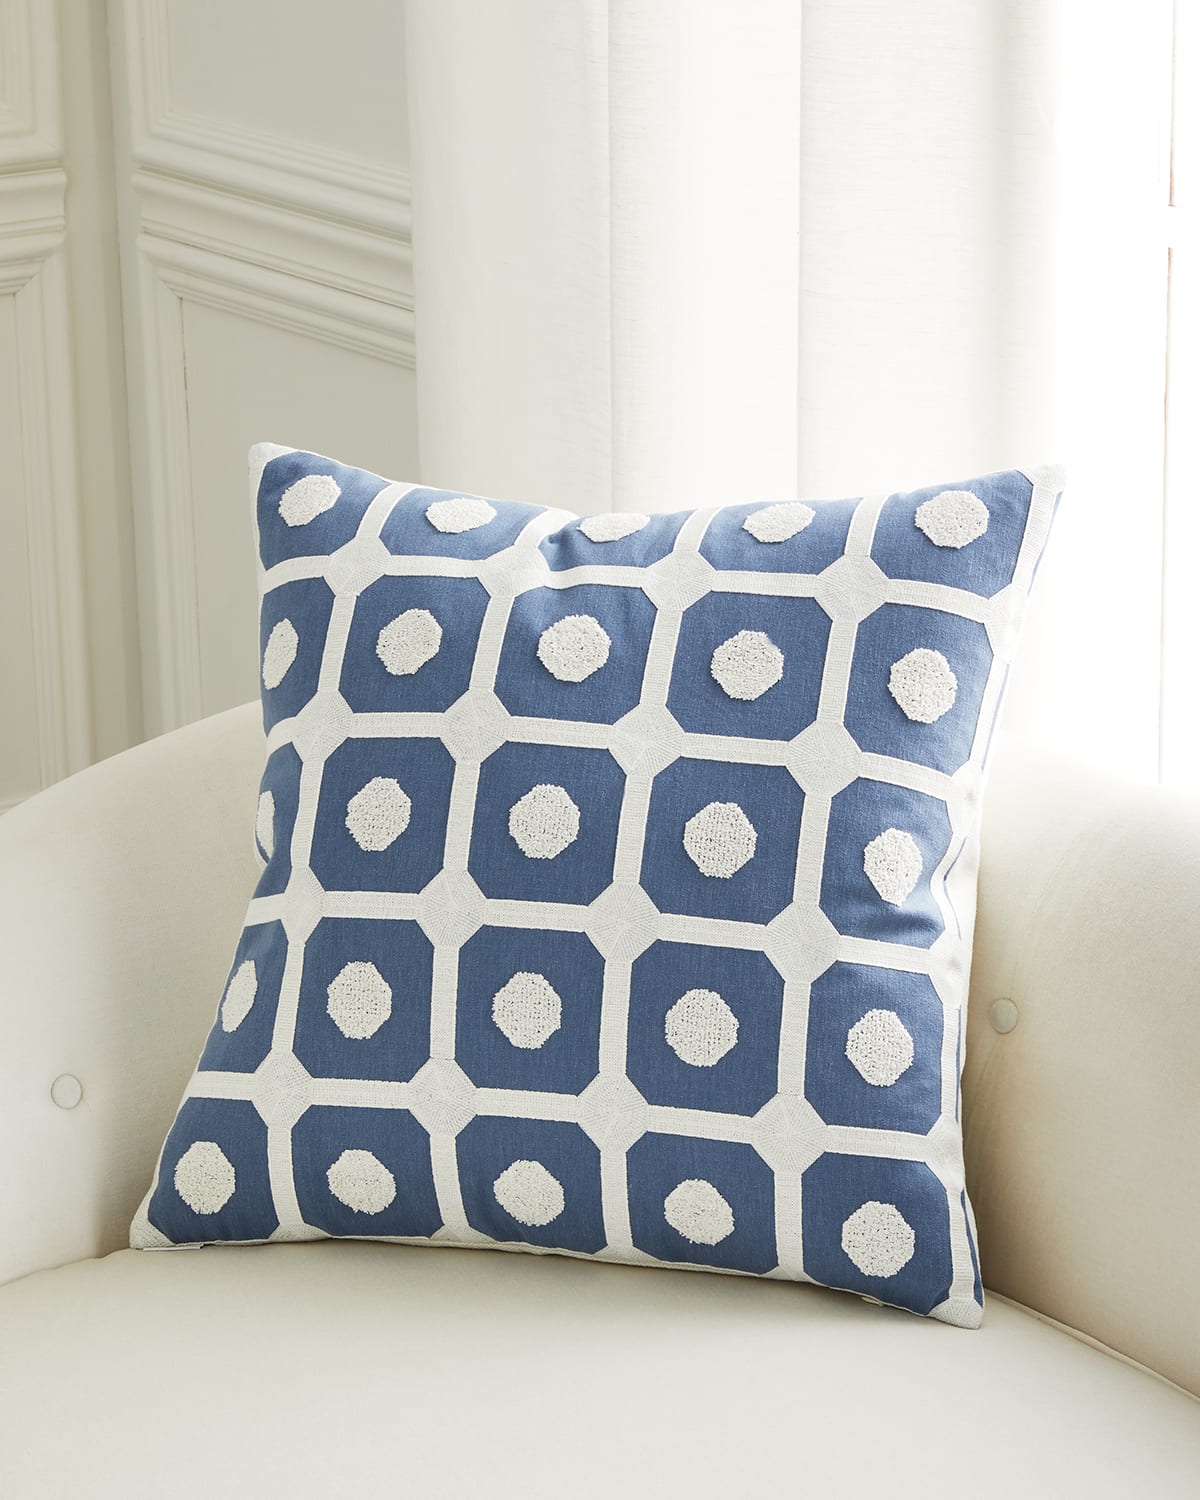 Needle and Thread Pillow